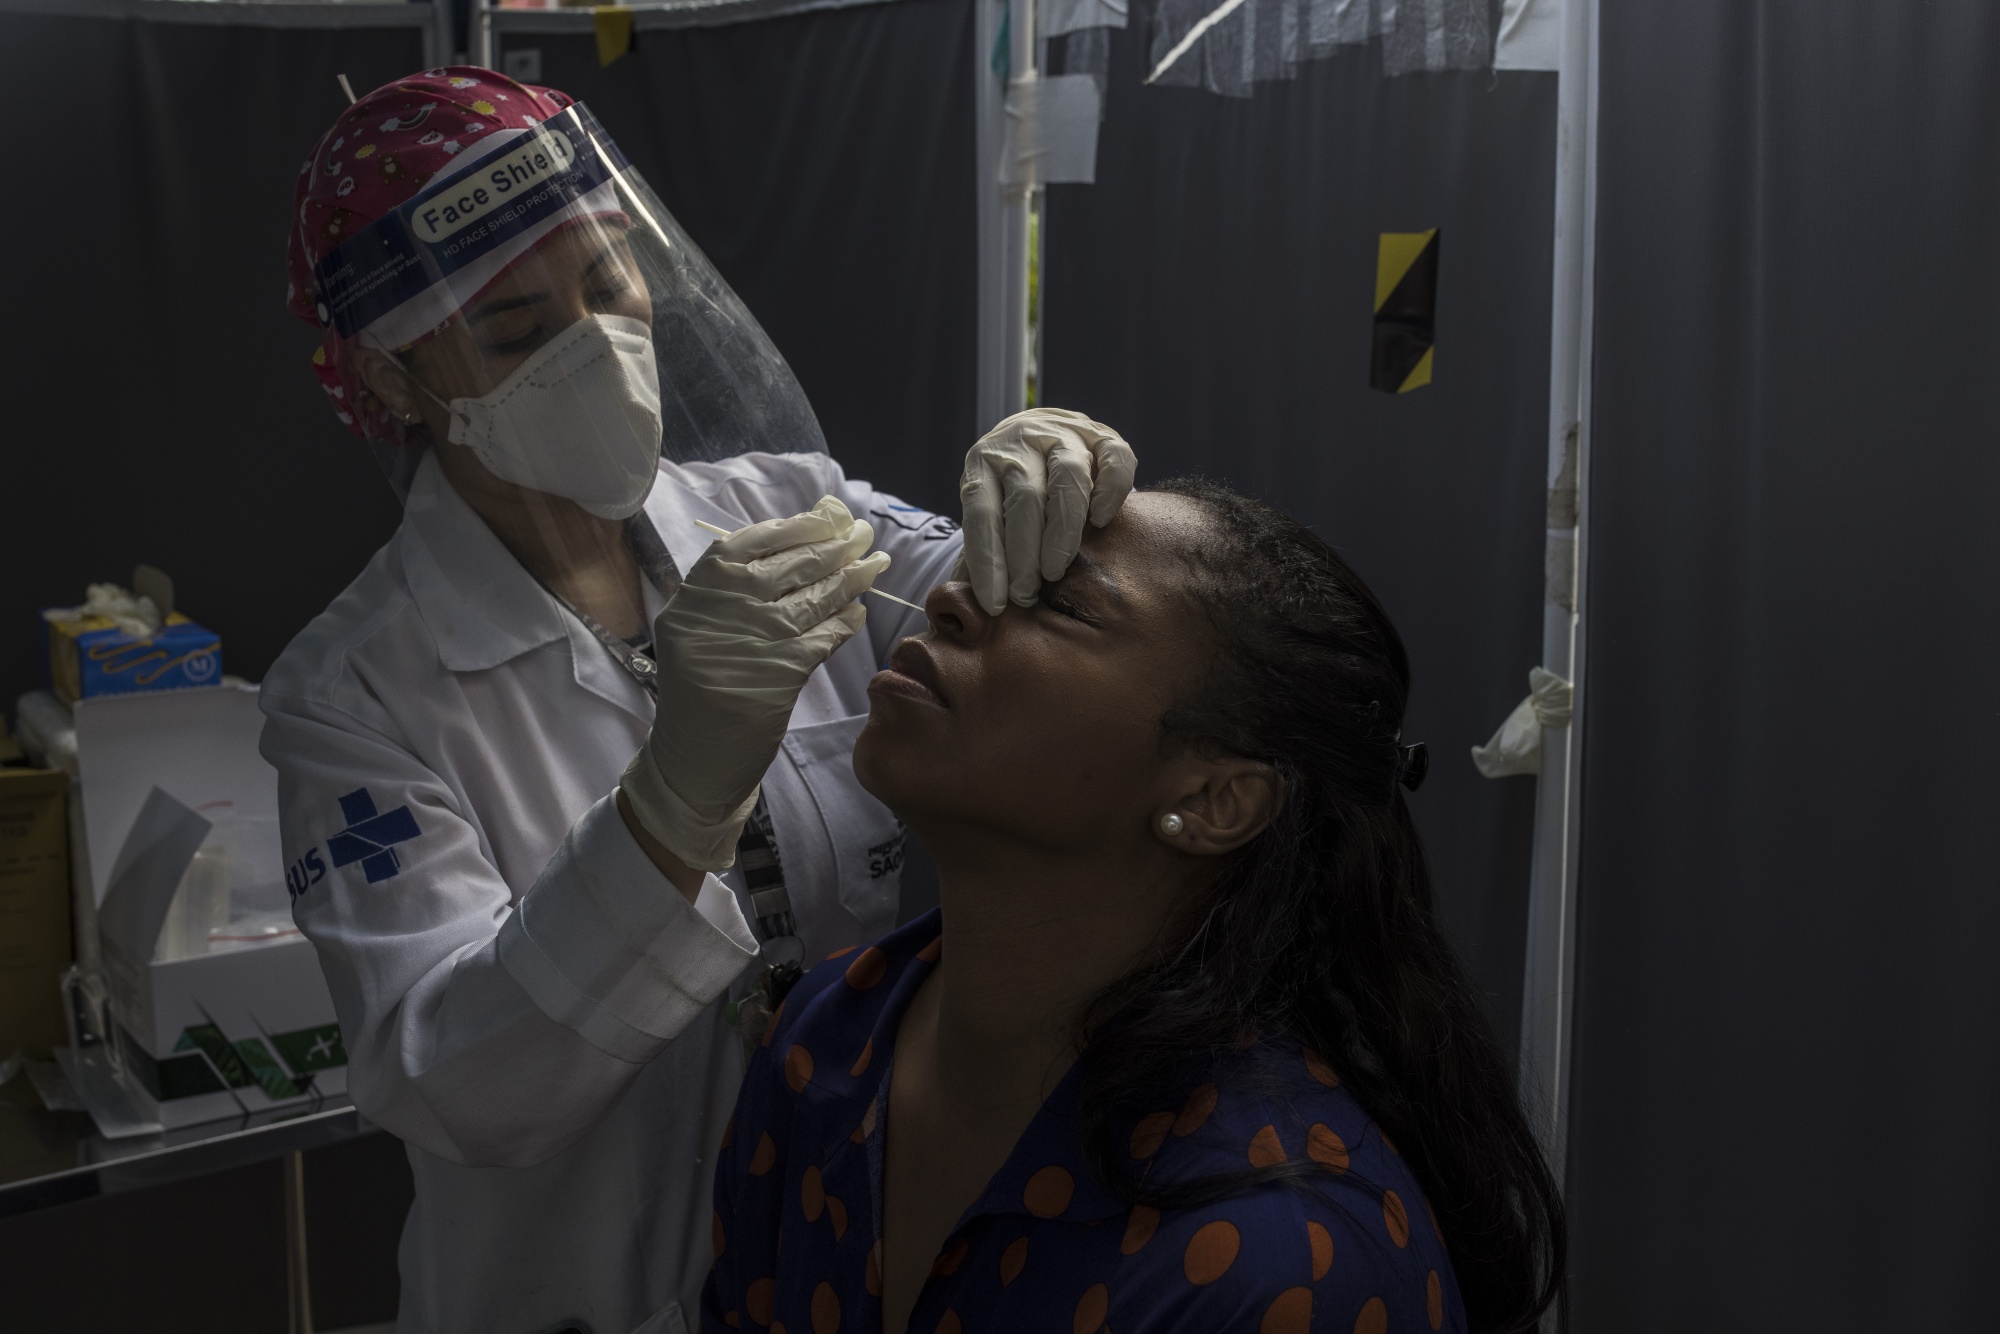 A health worker administers&nbsp;a Covid-19 swab test&nbsp;in Sao Paulo on Jan. 14.